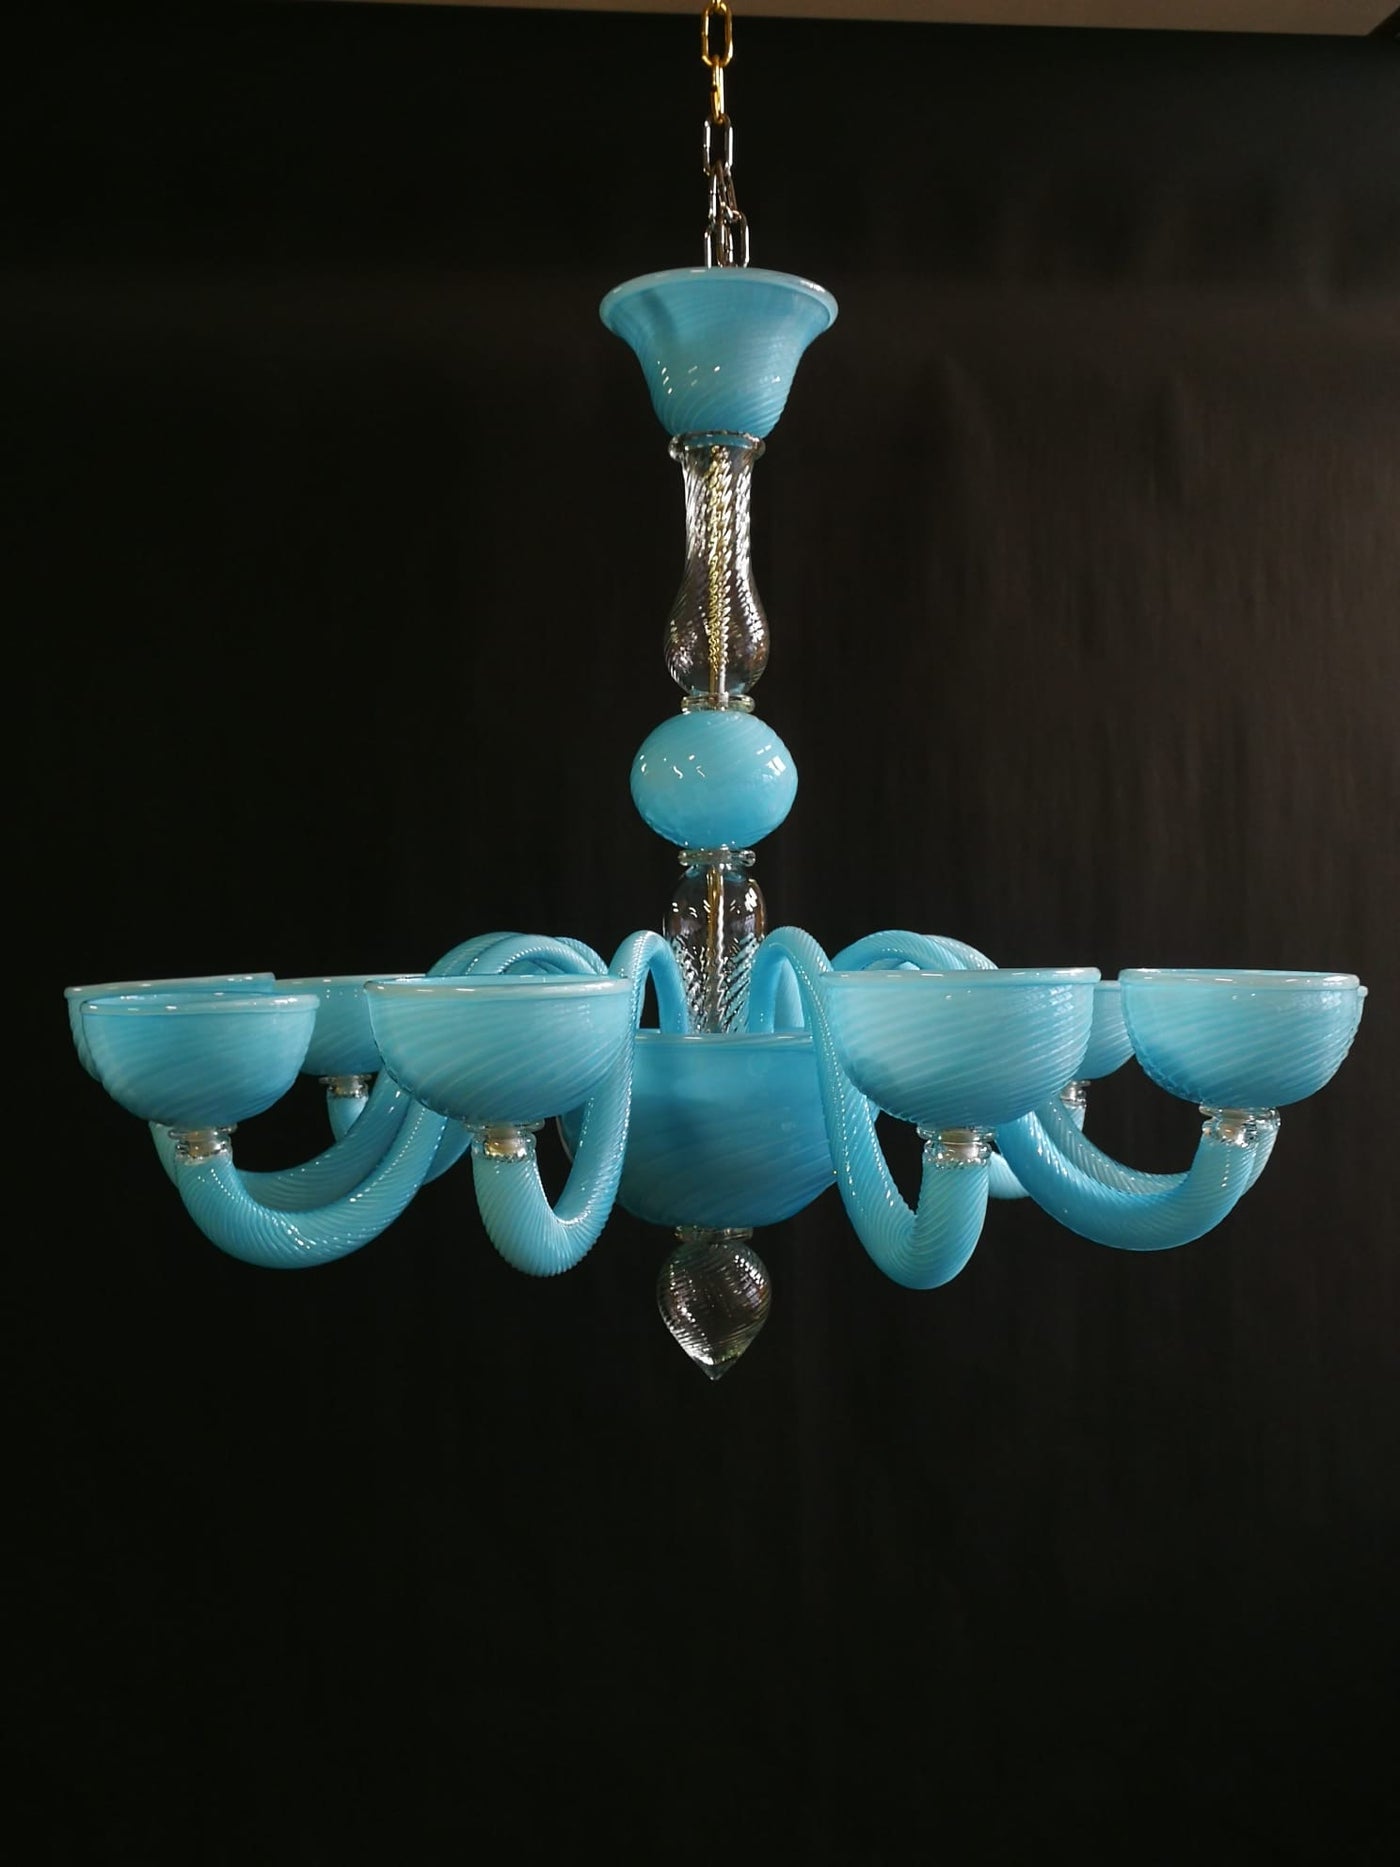 #7377 - Murano Canova Chandelier (Without Scrolls)